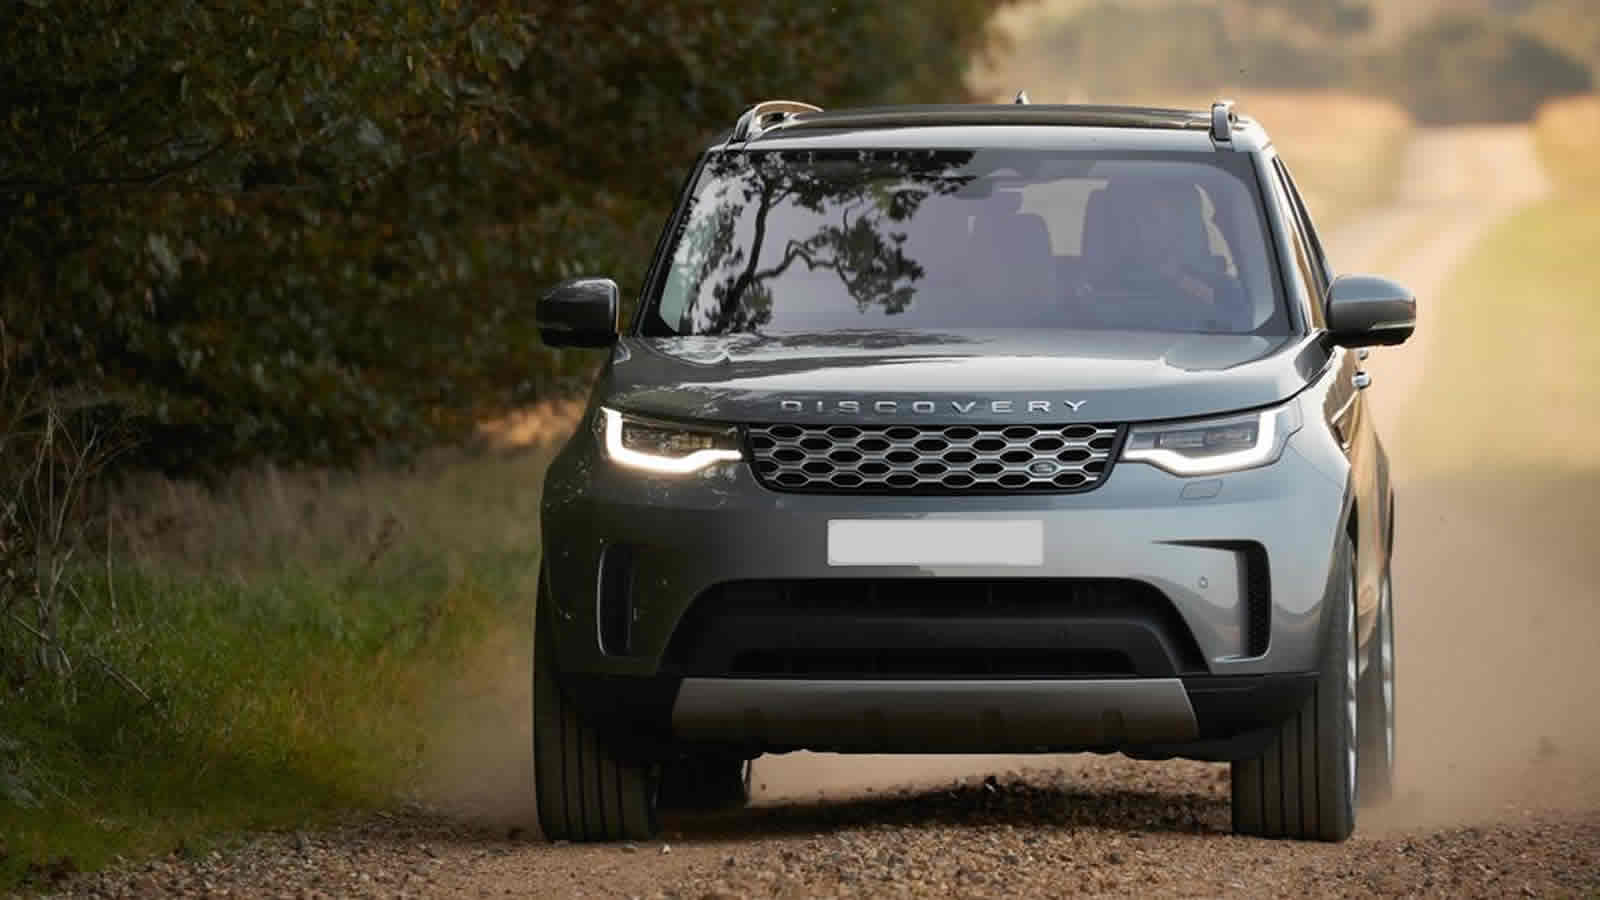 Commercial Land Rover Discovery Conversions and Activations